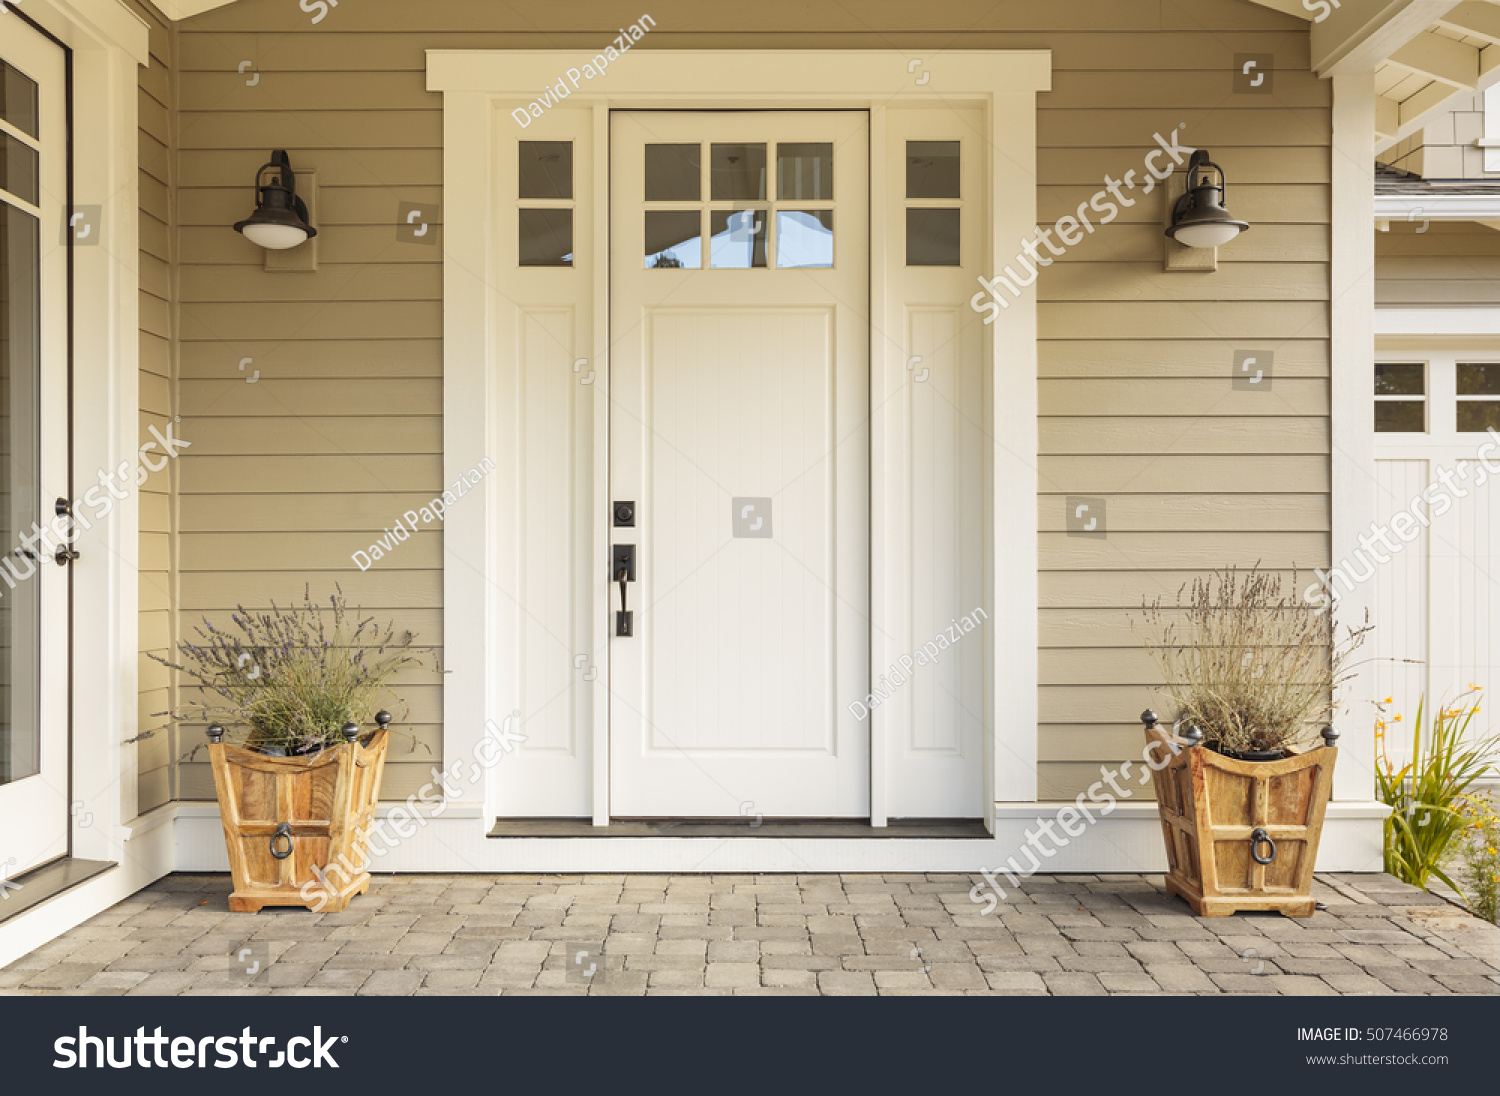 White front door with small square decorative windows and flower pots #507466978